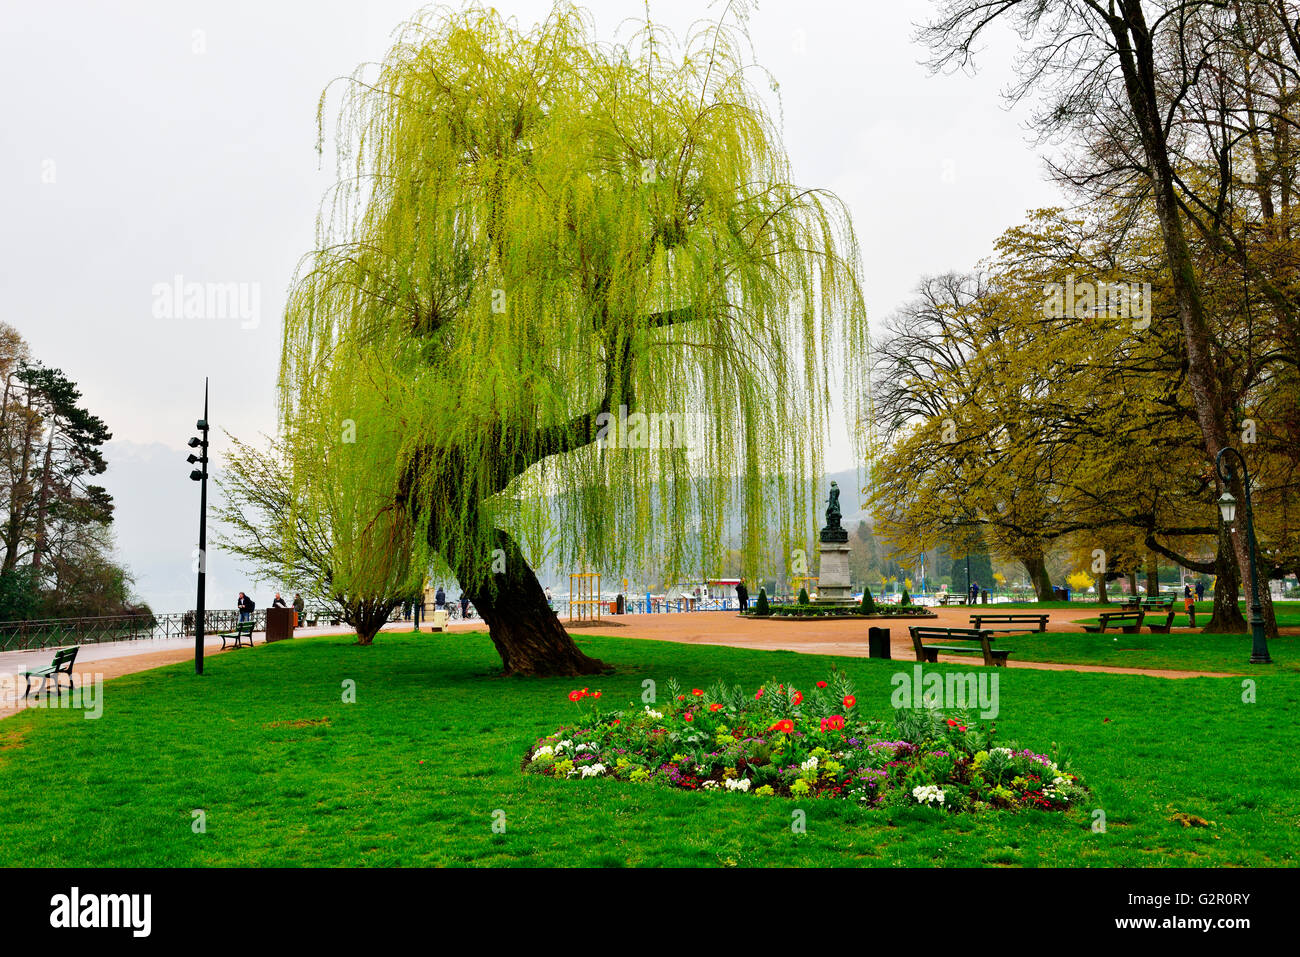 Weeping willow tree in park (by Les Jardins de l'Europe), Annecy, France Stock Photo